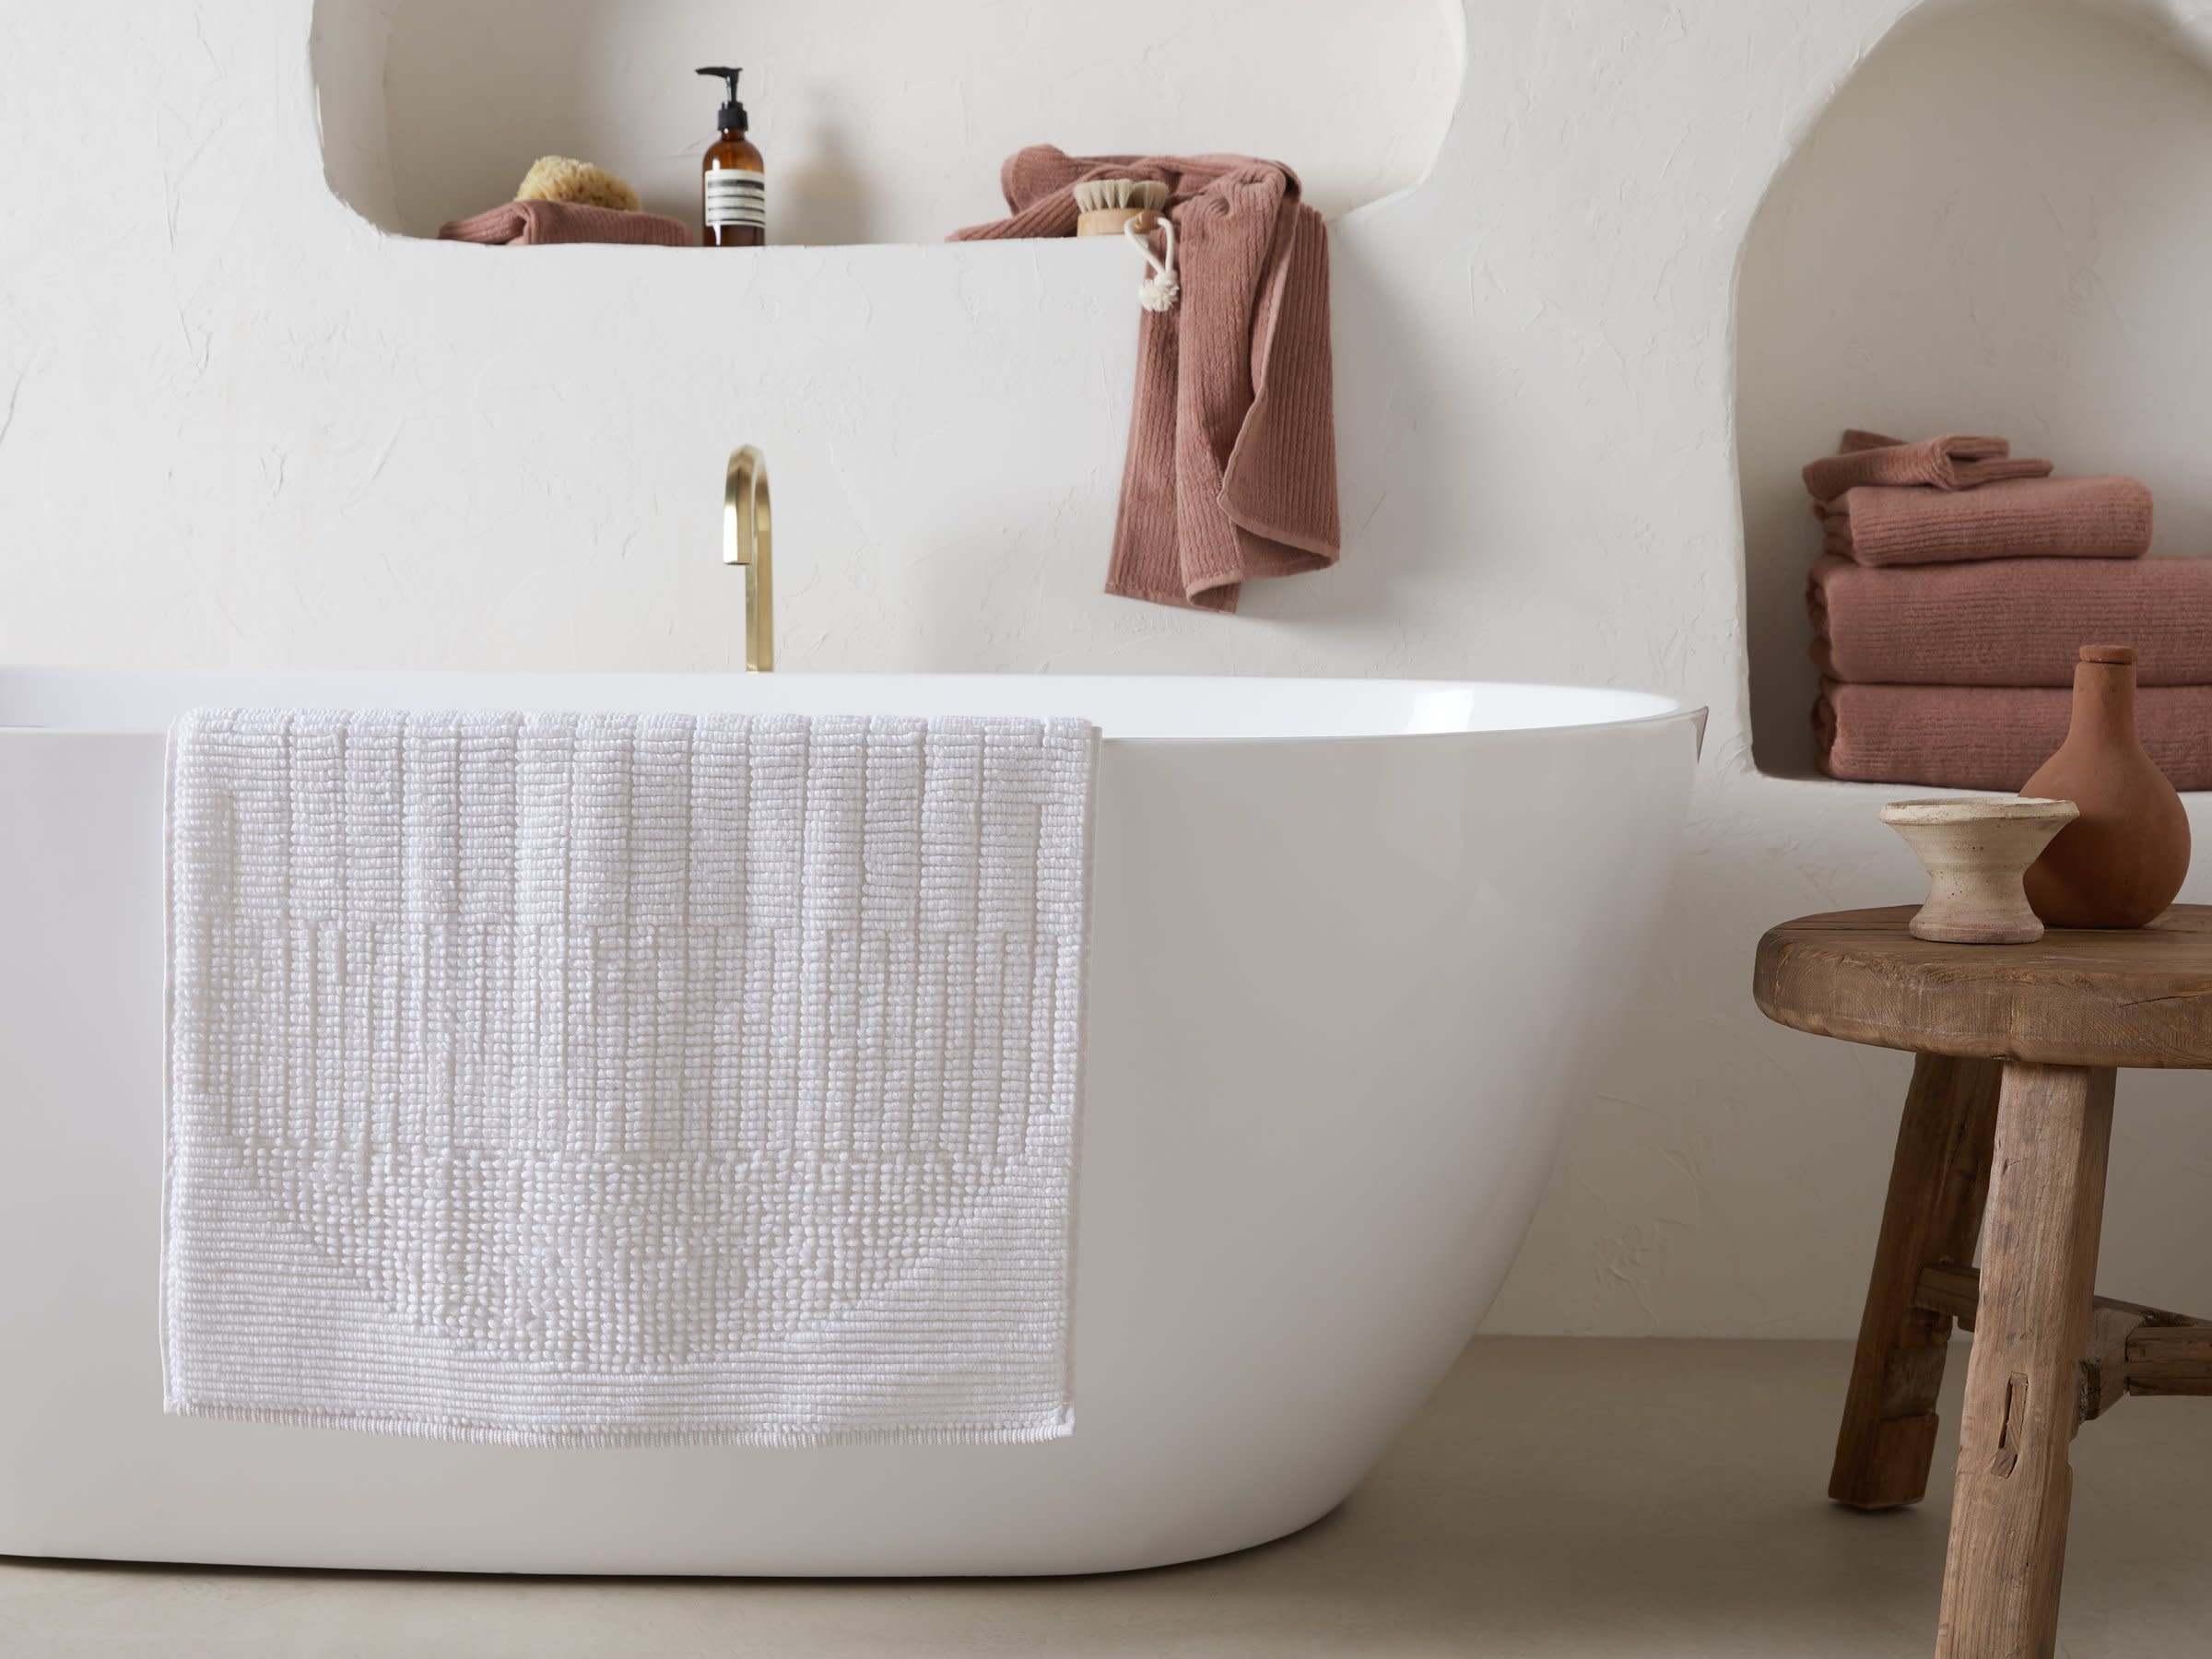 White And Cream Sunset Bath Rug Shown In A Room